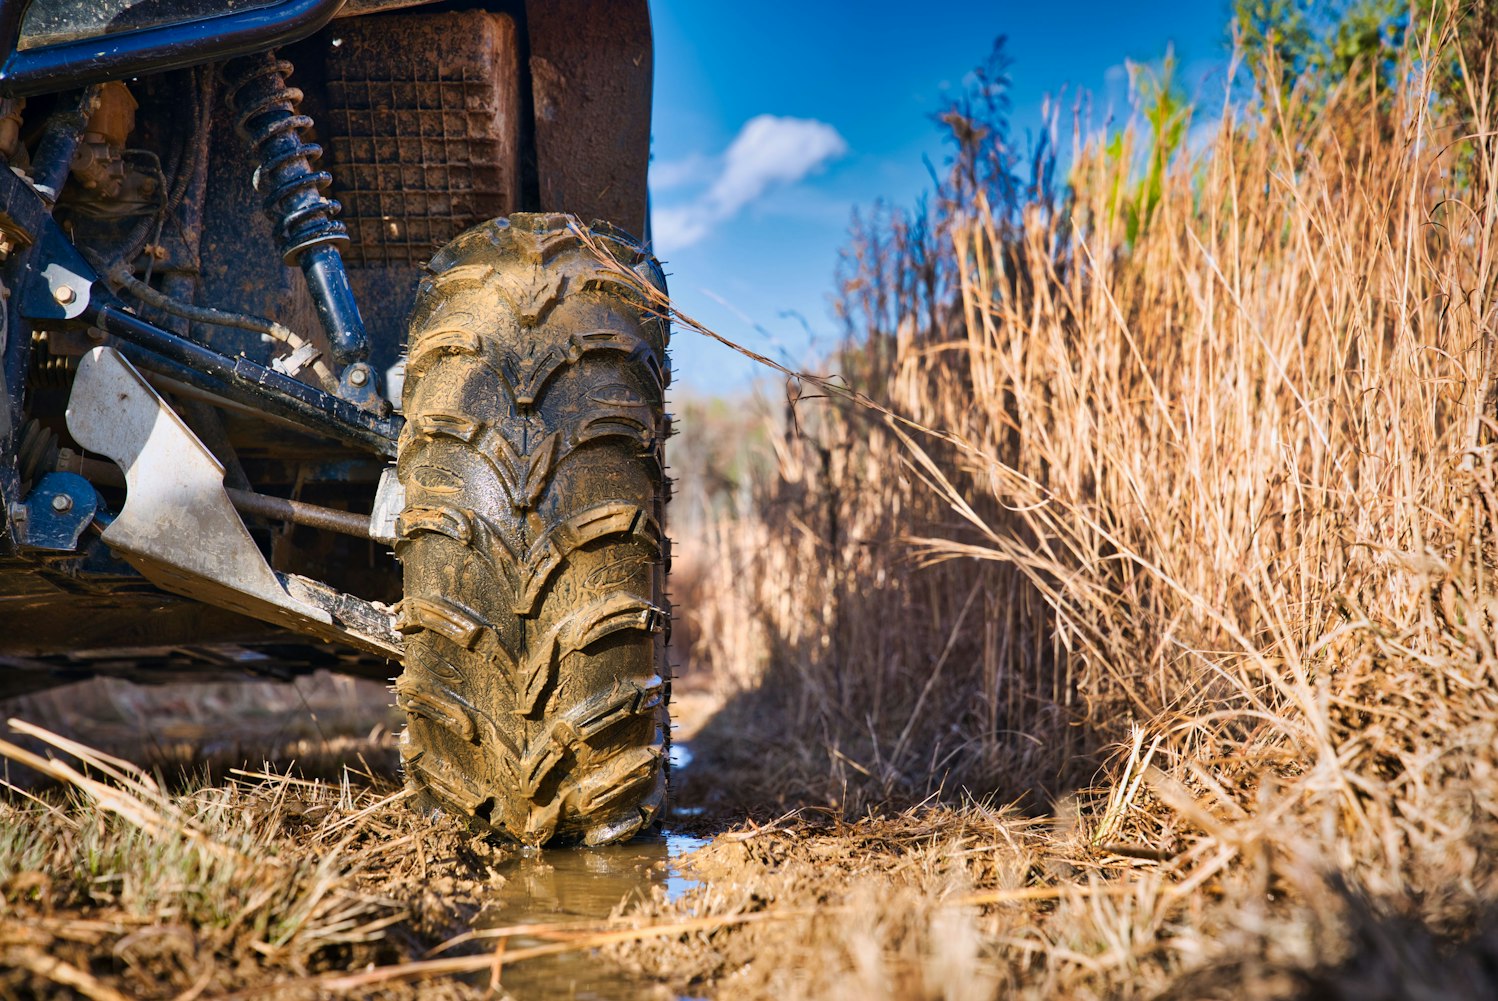 A ground level view of a side-by-side tire on a wet trail in the middle of a year old cut-over.